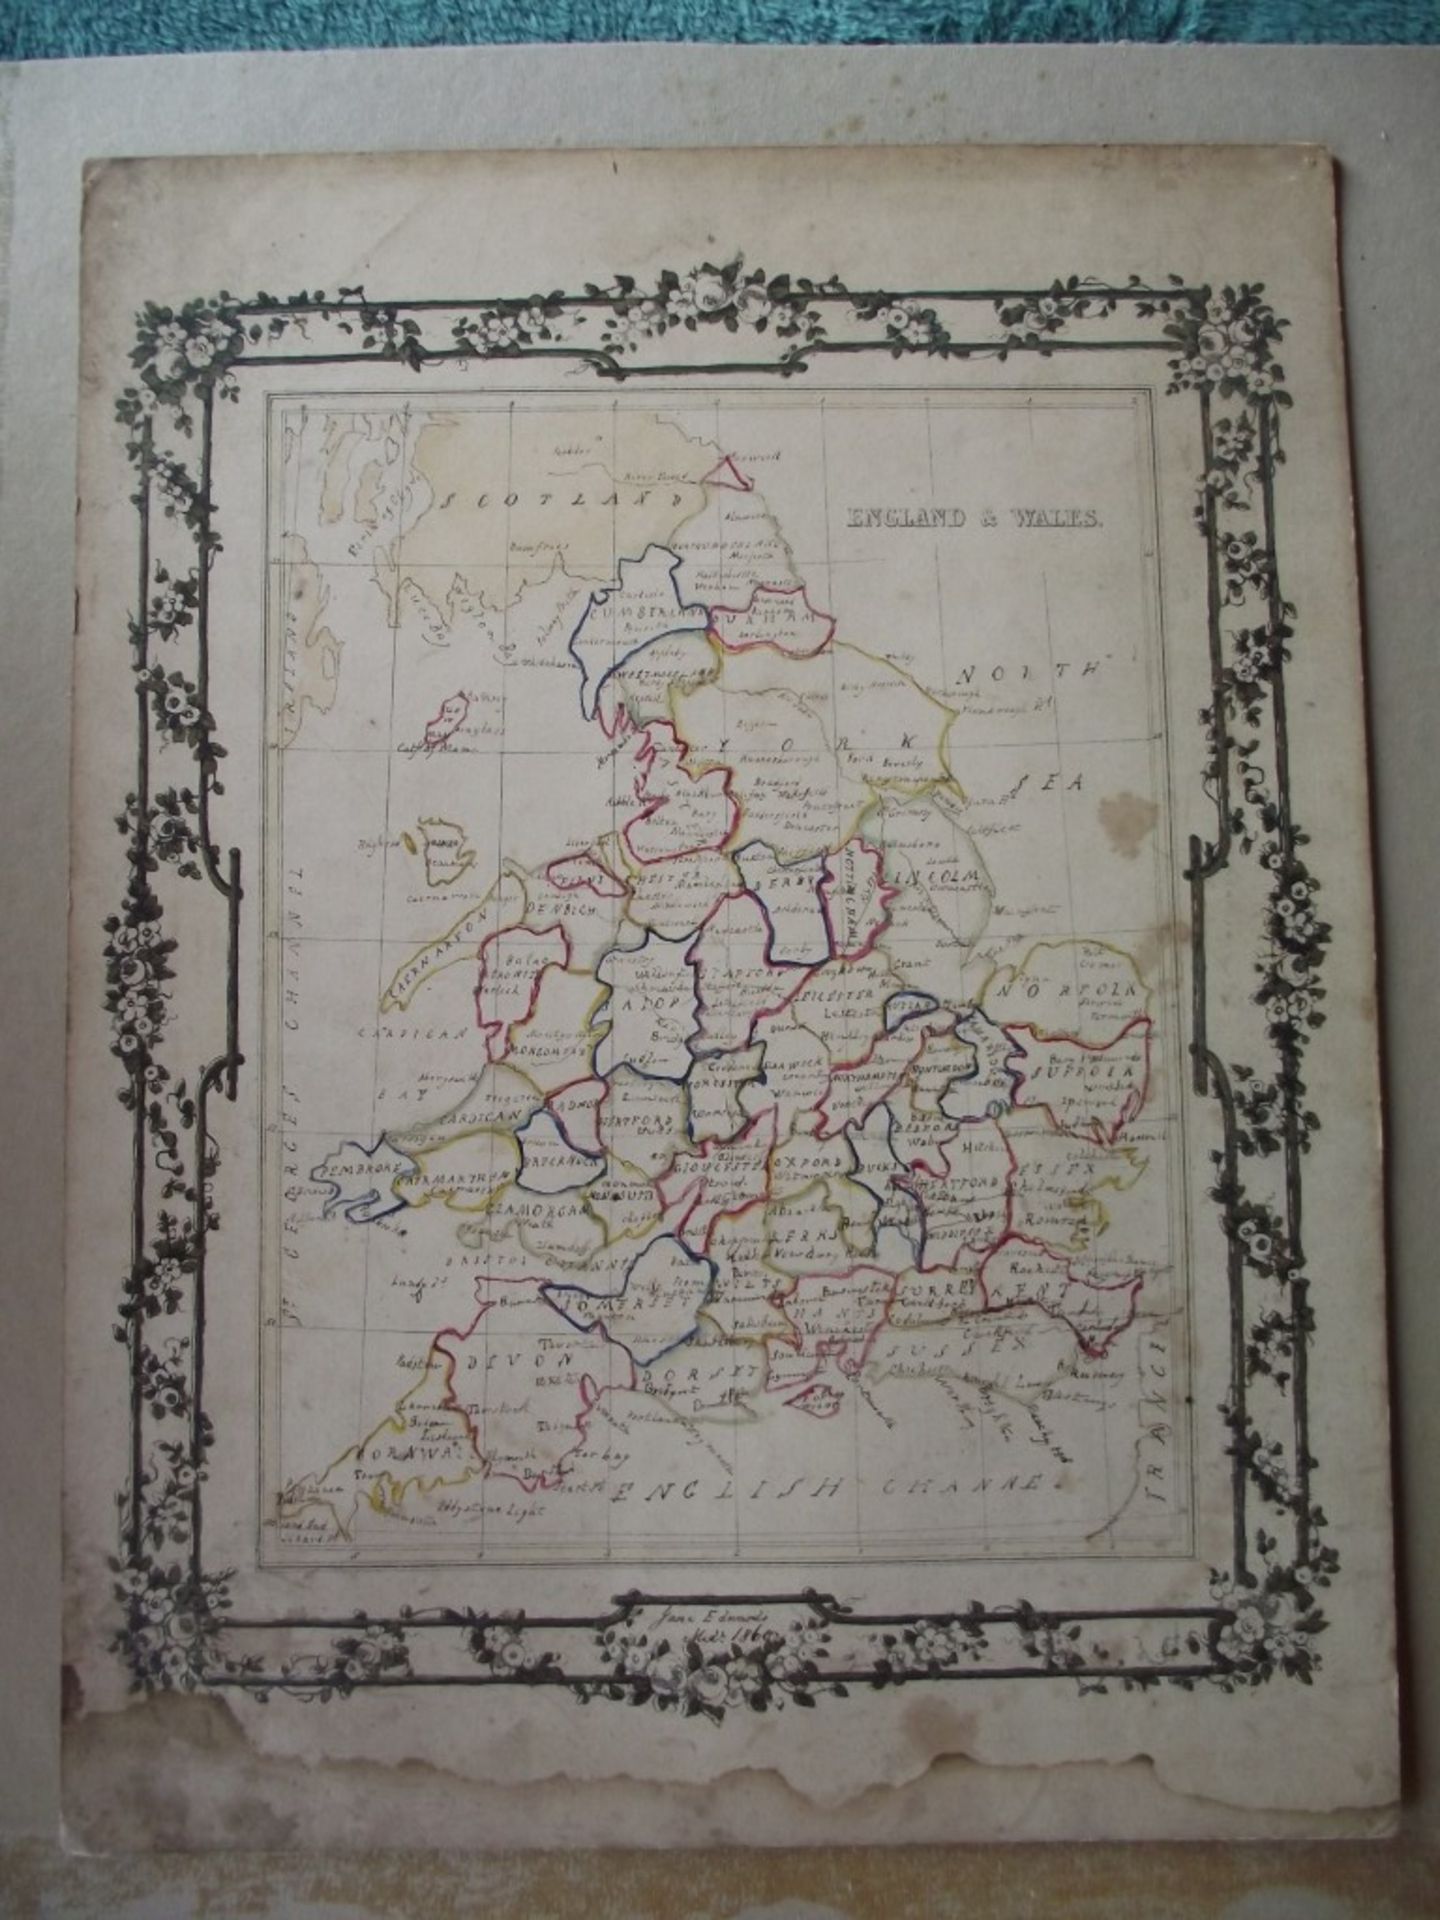 2 x 19th Century Hand Drawn Maps - Signed & Dated By Jane Edwards 1860 - Image 17 of 34